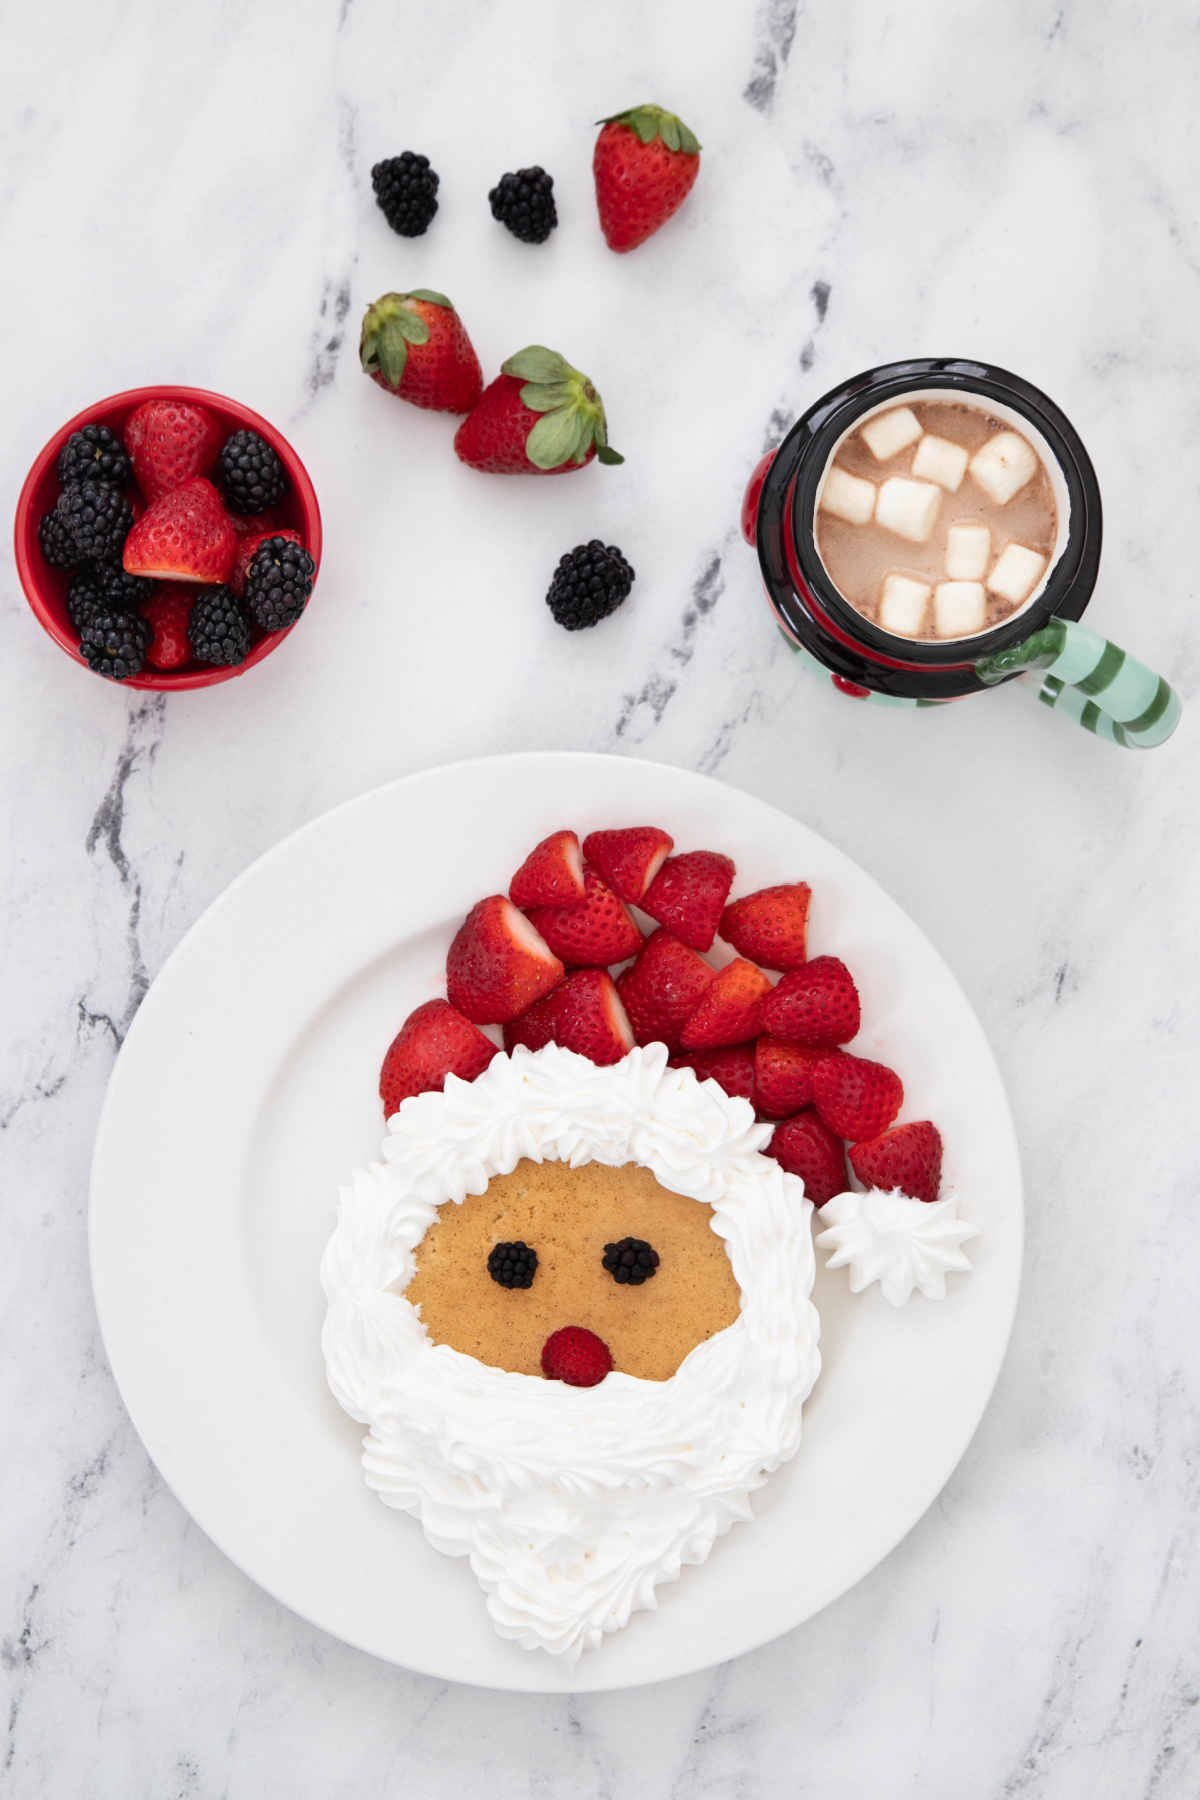 A plate with a santa claus pancake on it.